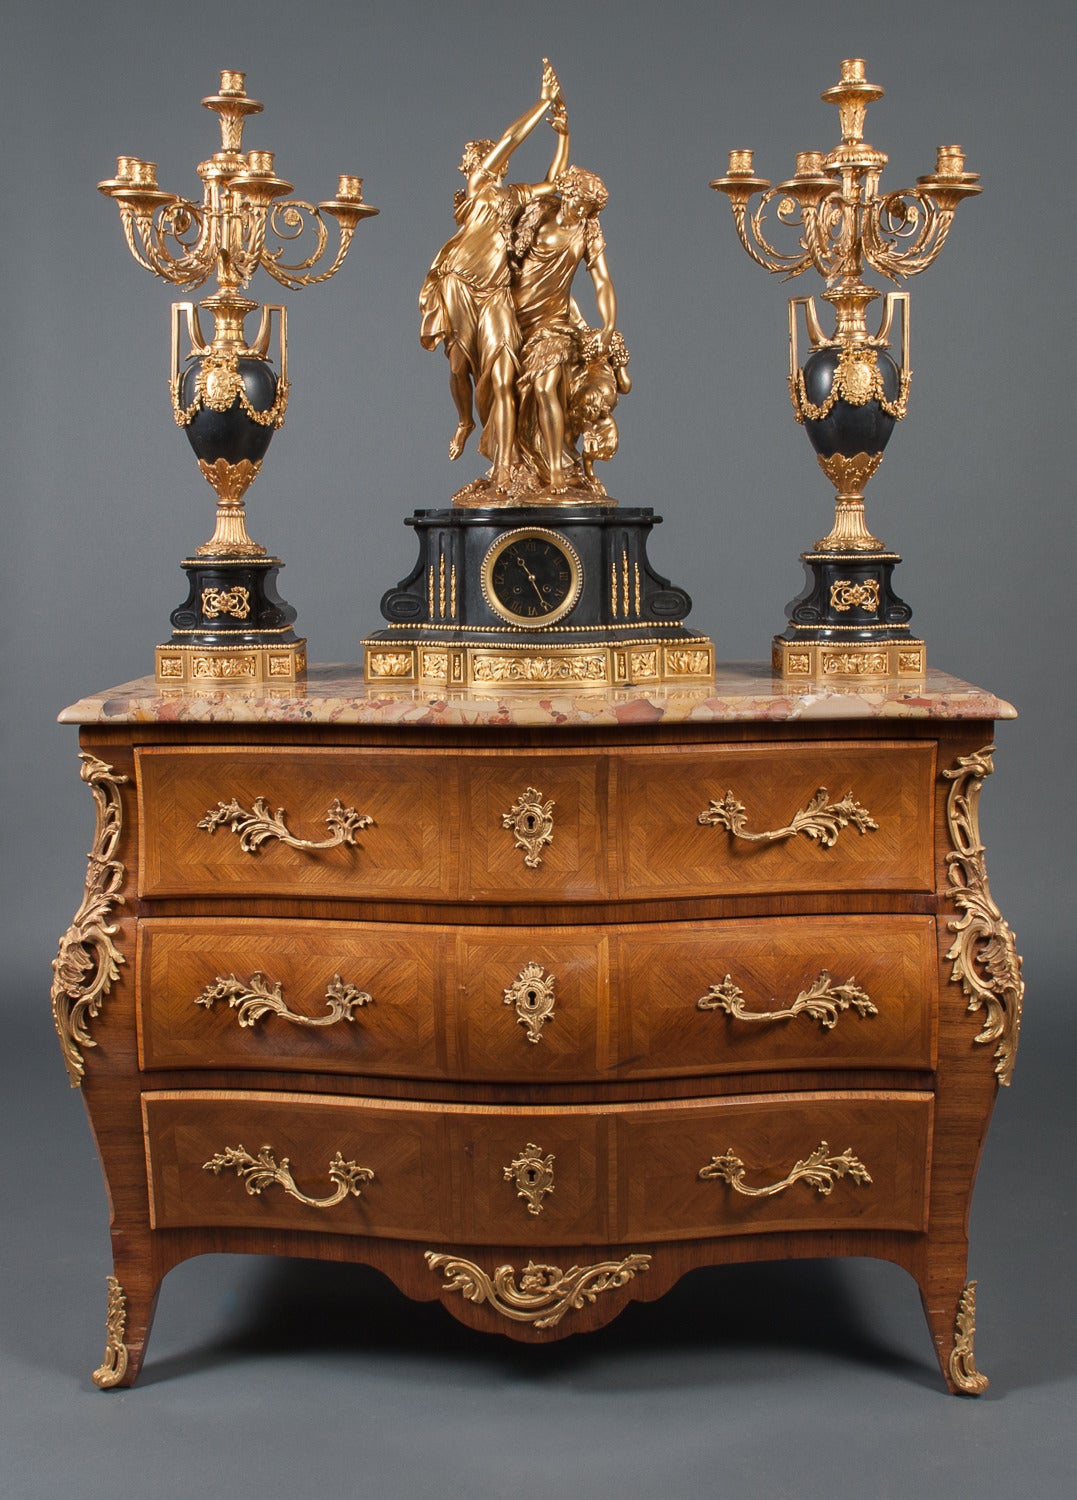 A French Napoleon III Ormolu & Marble Three Piece Garniture After Clodion C.1870

France, Circa 1870

Dimensions of Clock: Depth: 11